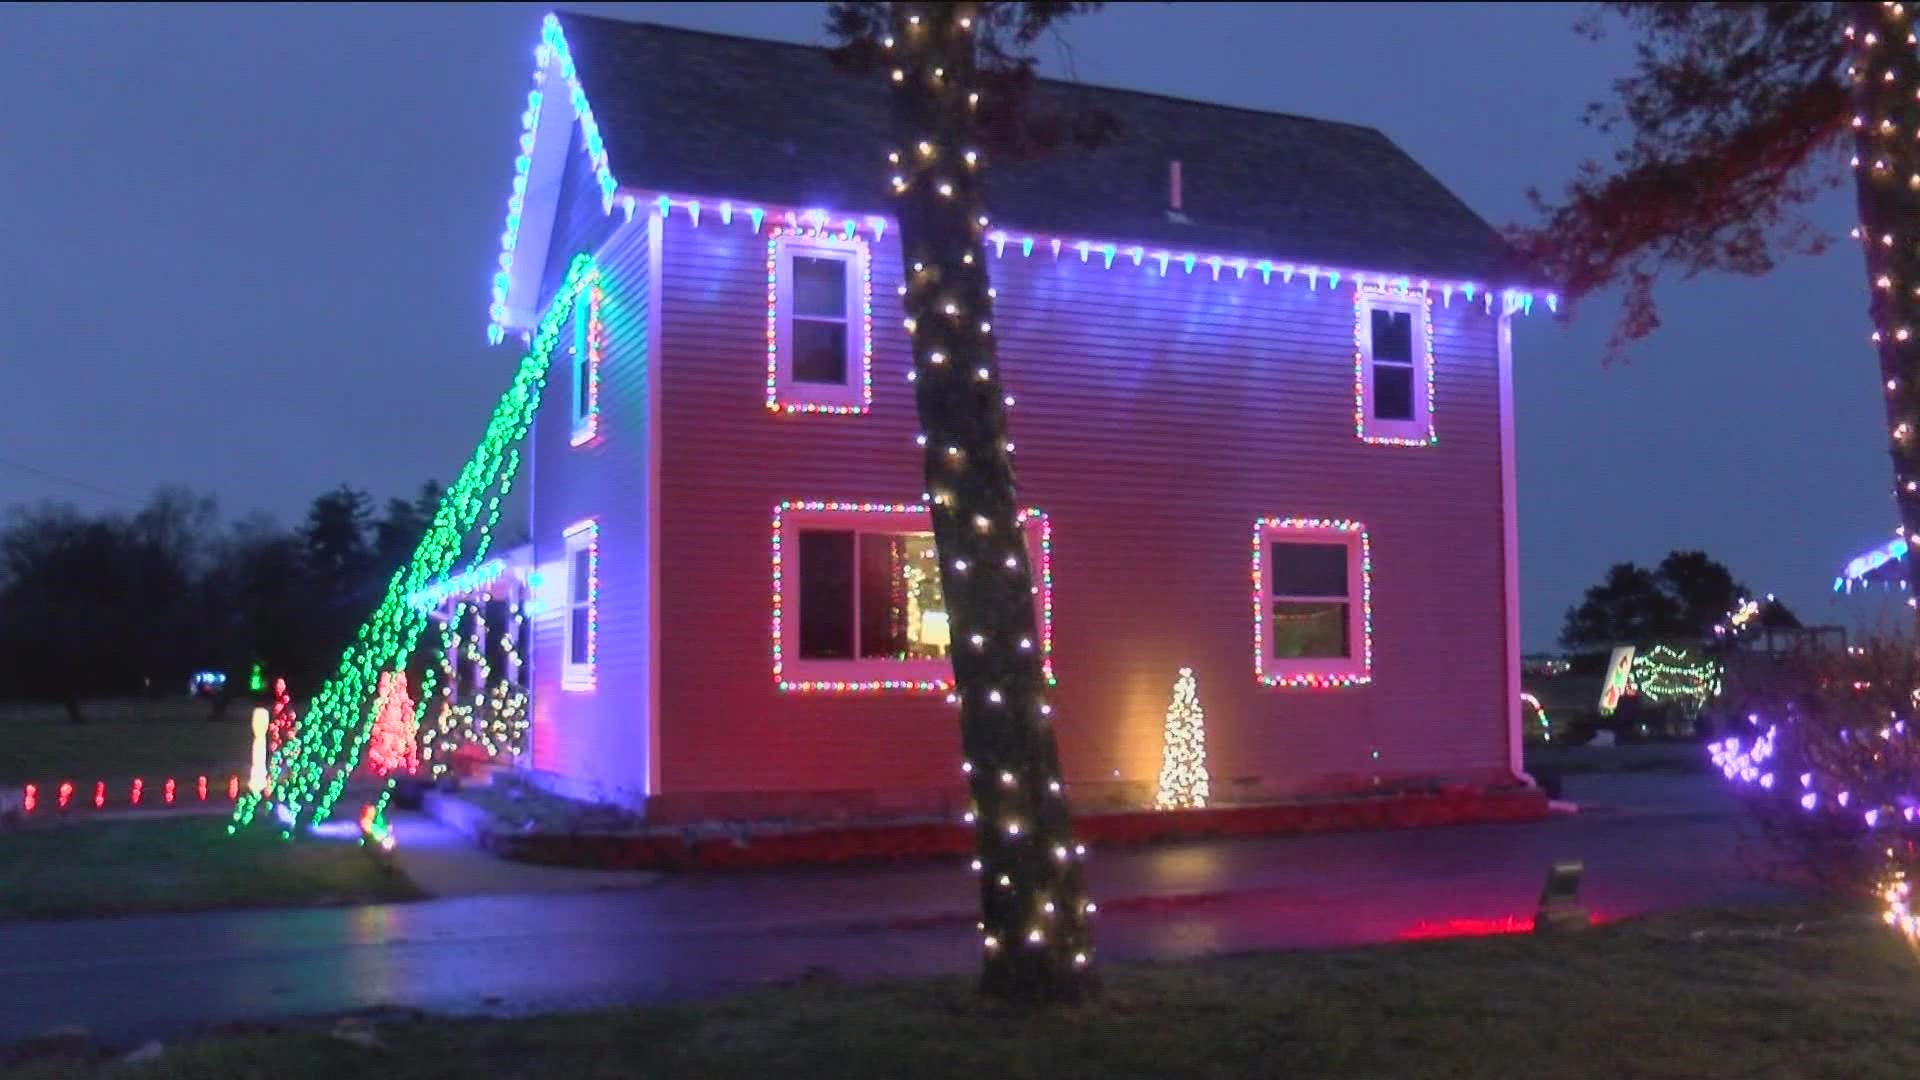 The home has been in Todd Kerschner's family for a few generations. Starting with his dad Delbert, they would decorate the property with thousands of lights.